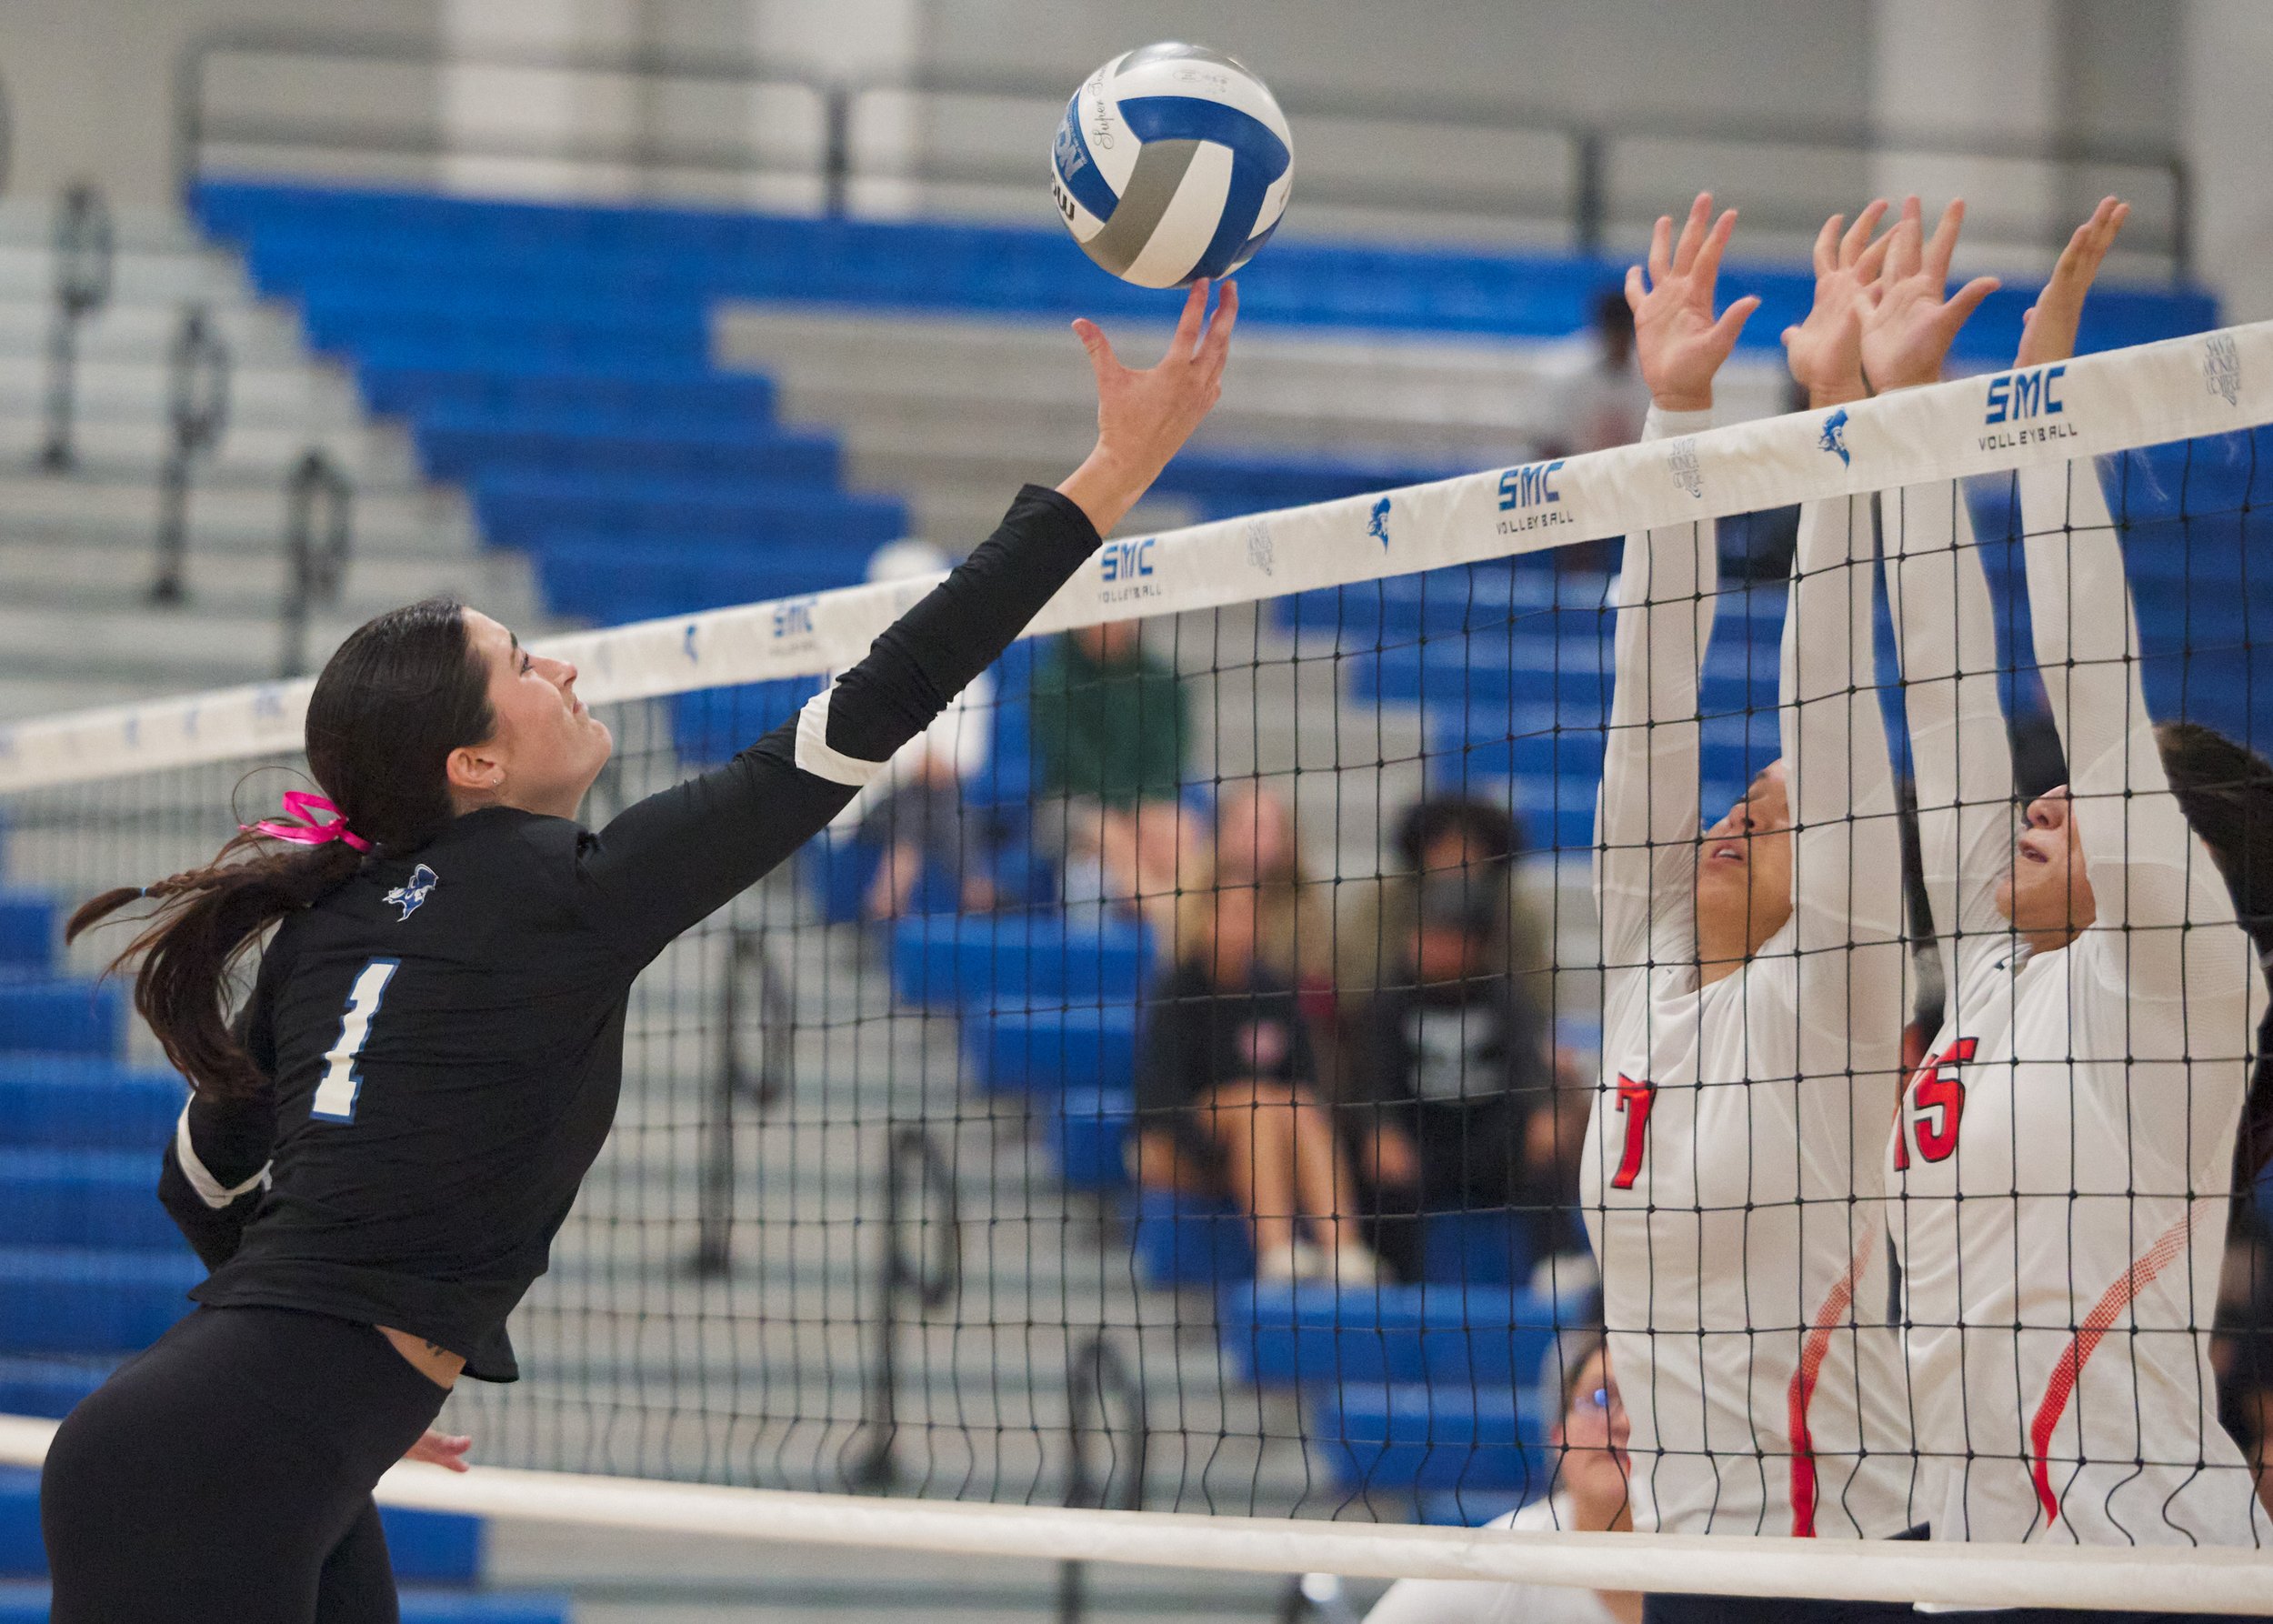  Santa Monica College Corsairs' Maiella Riva sends the ball past Citrus College Owls' Tara Biscan and Desiree Reyes during the women's volleyball match on Wednesday, Oct. 25, 2026, at Corsair Gym in Santa Monica, Calif. The Corsairs won 3-0. (Nichola